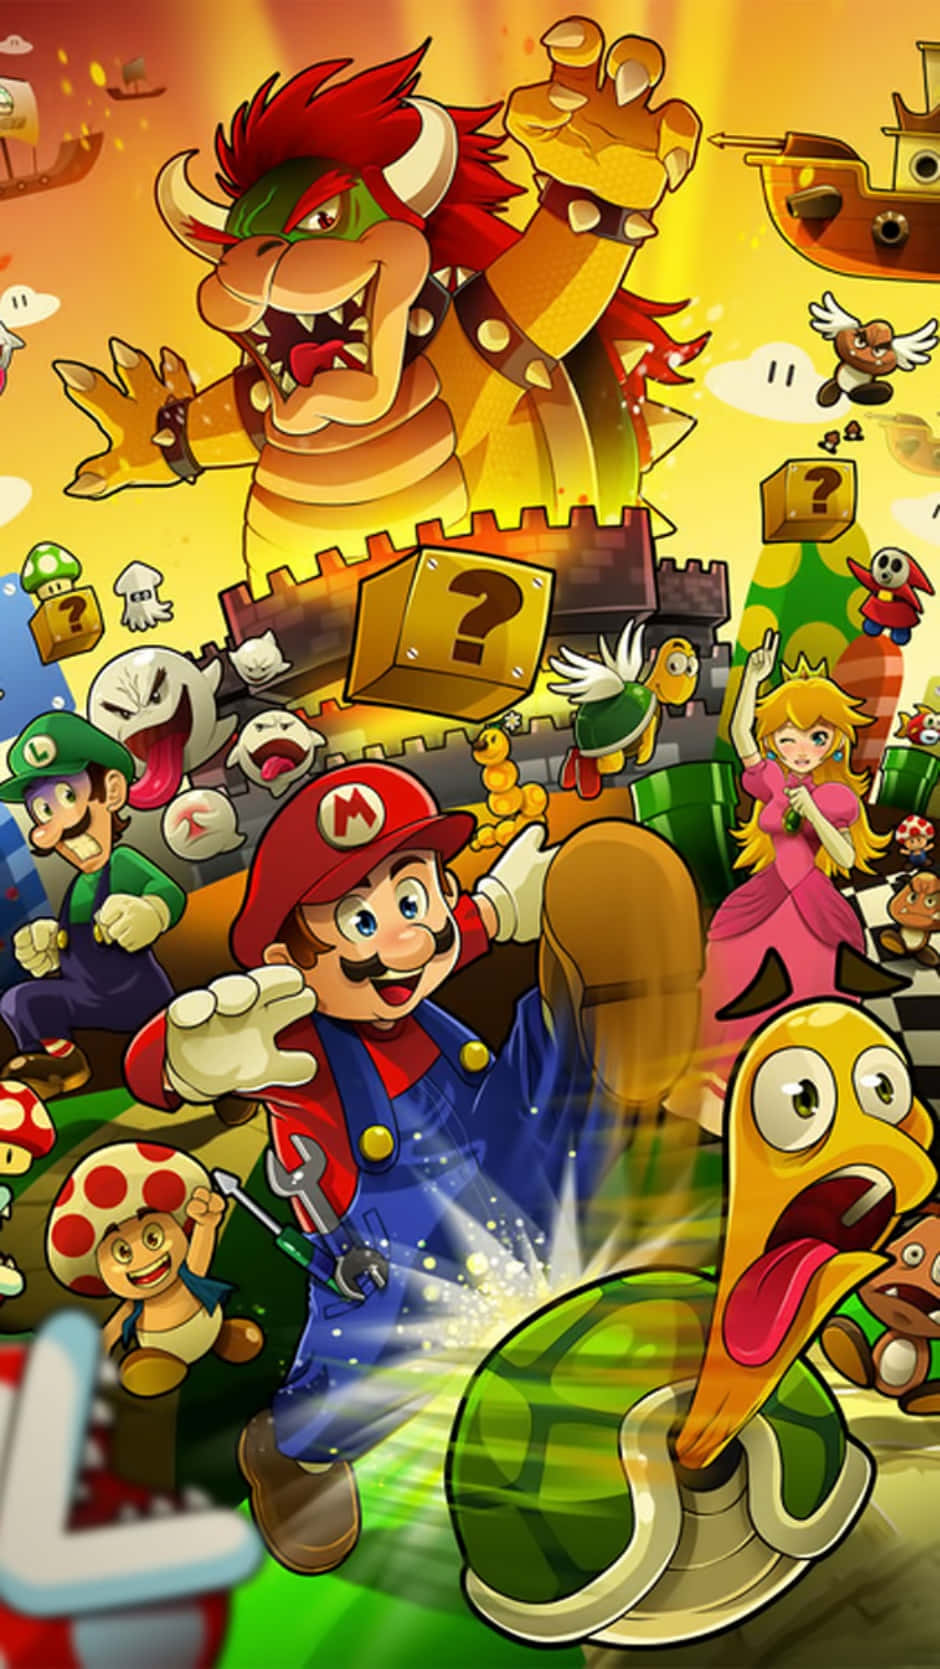 Download Super Mario Characters Group Wallpaper Wallpaper | Wallpapers.com